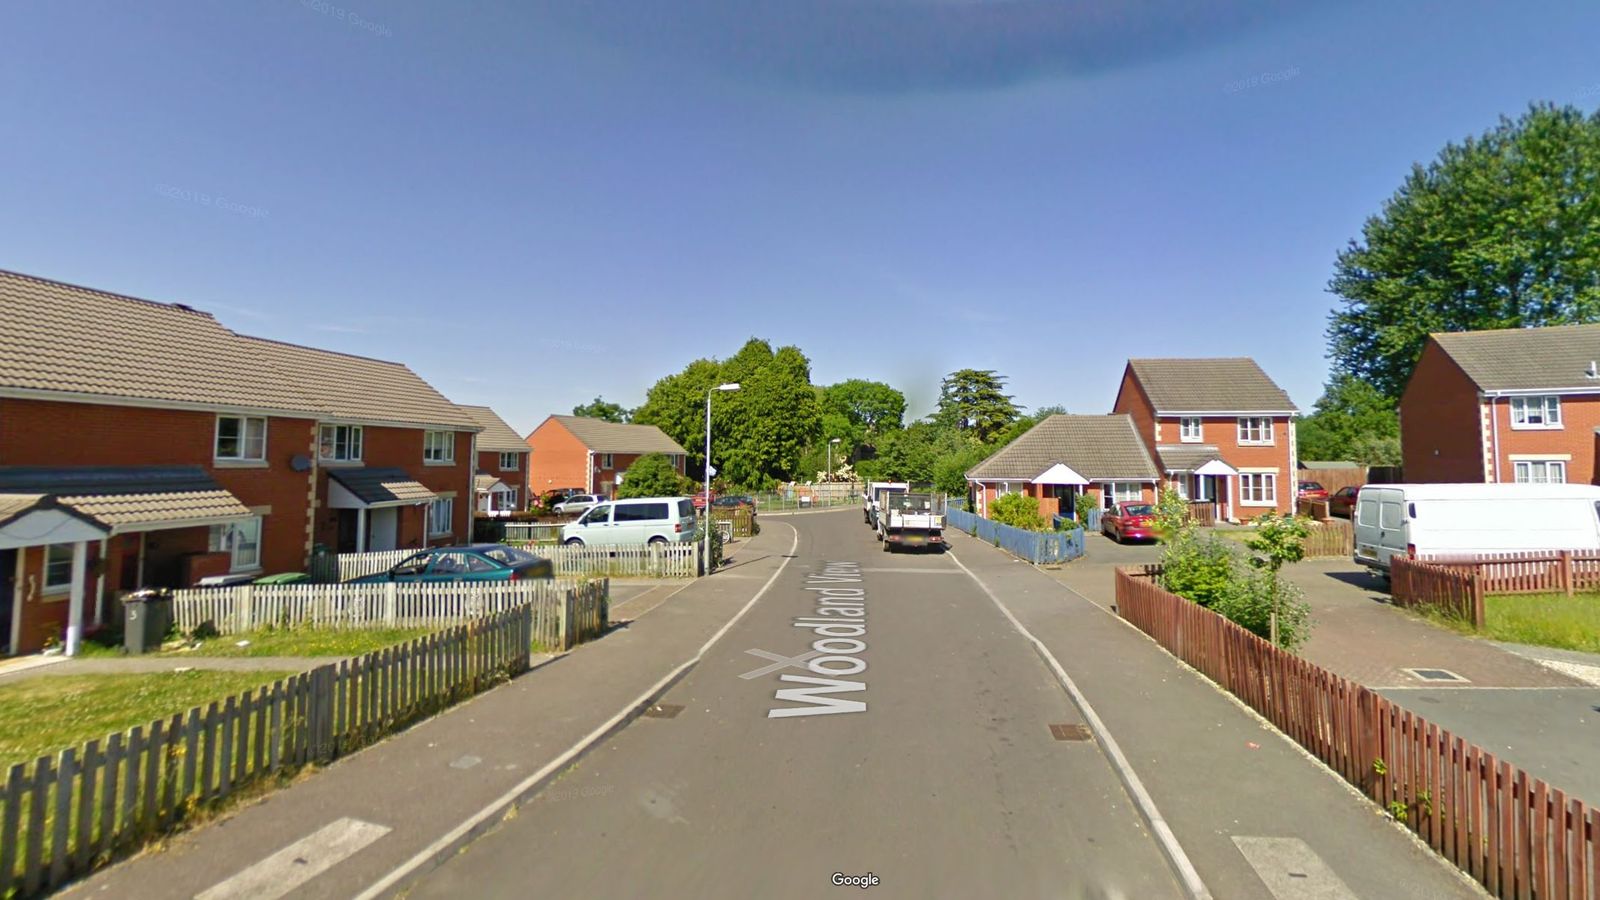 Eight-year-old Boy Dies After Being Hit by a Car in Wiltshire